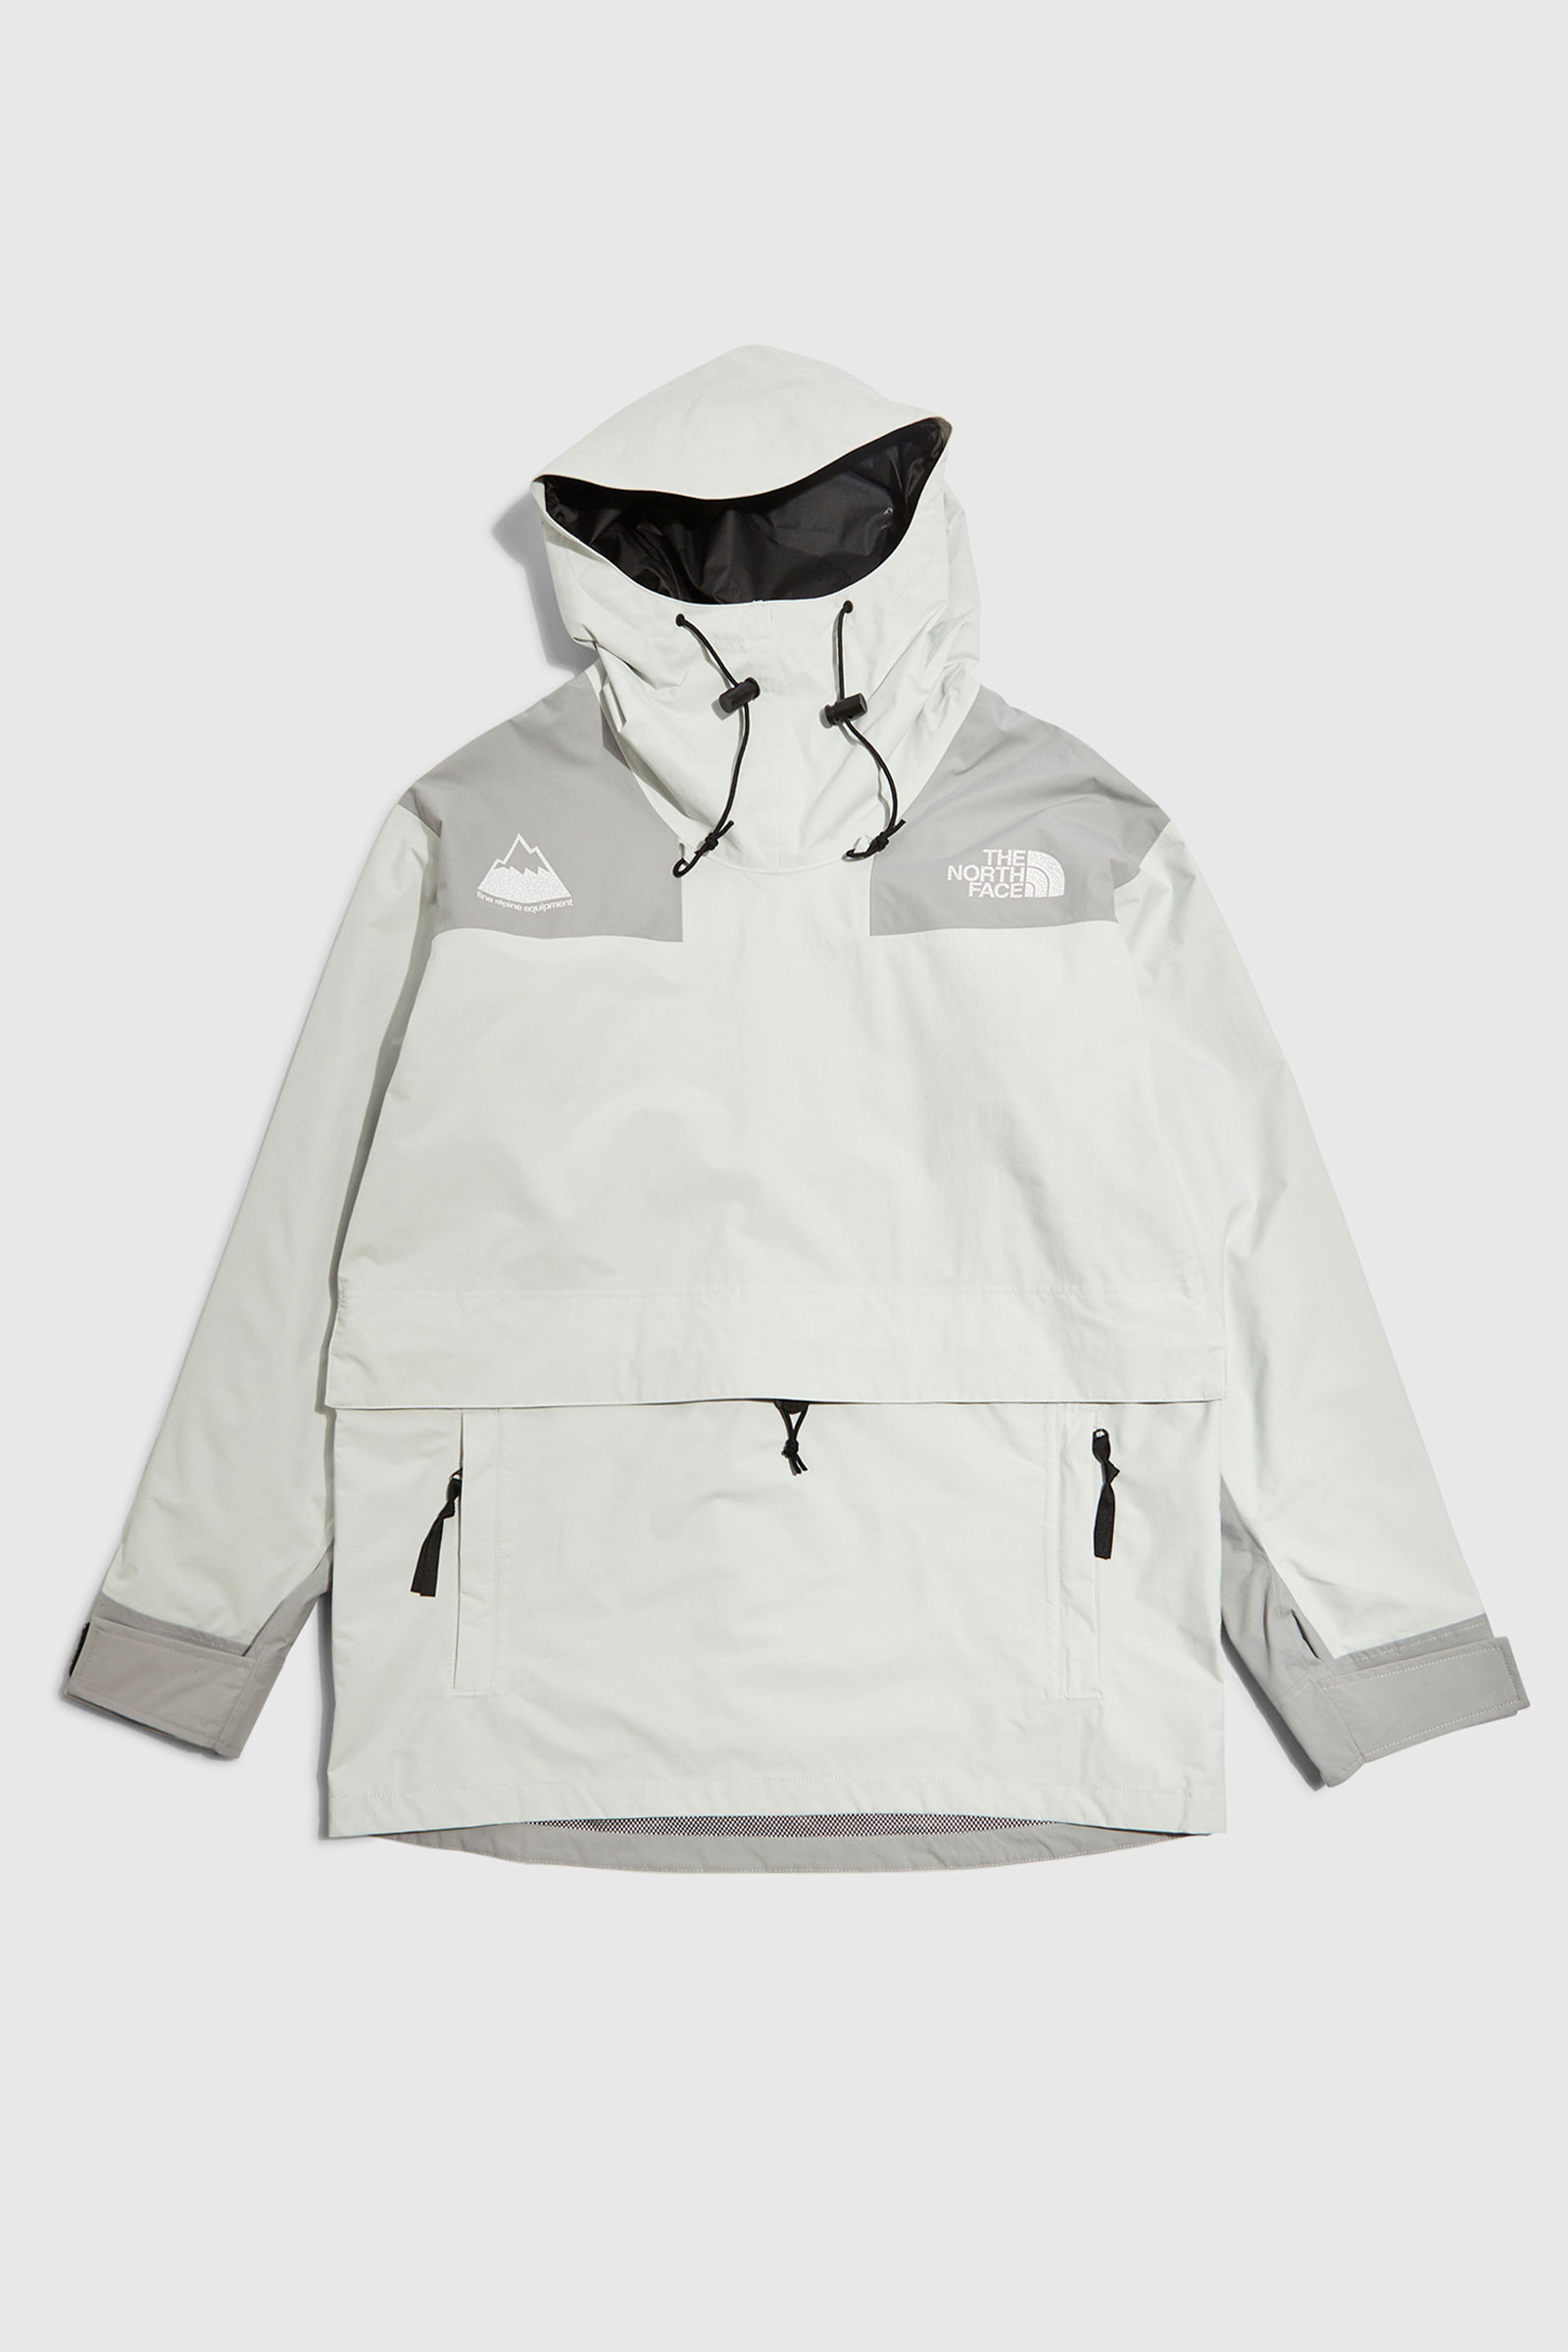 The North Face Origins 86 Mountain Anorak - Nf0a5j5m9b8